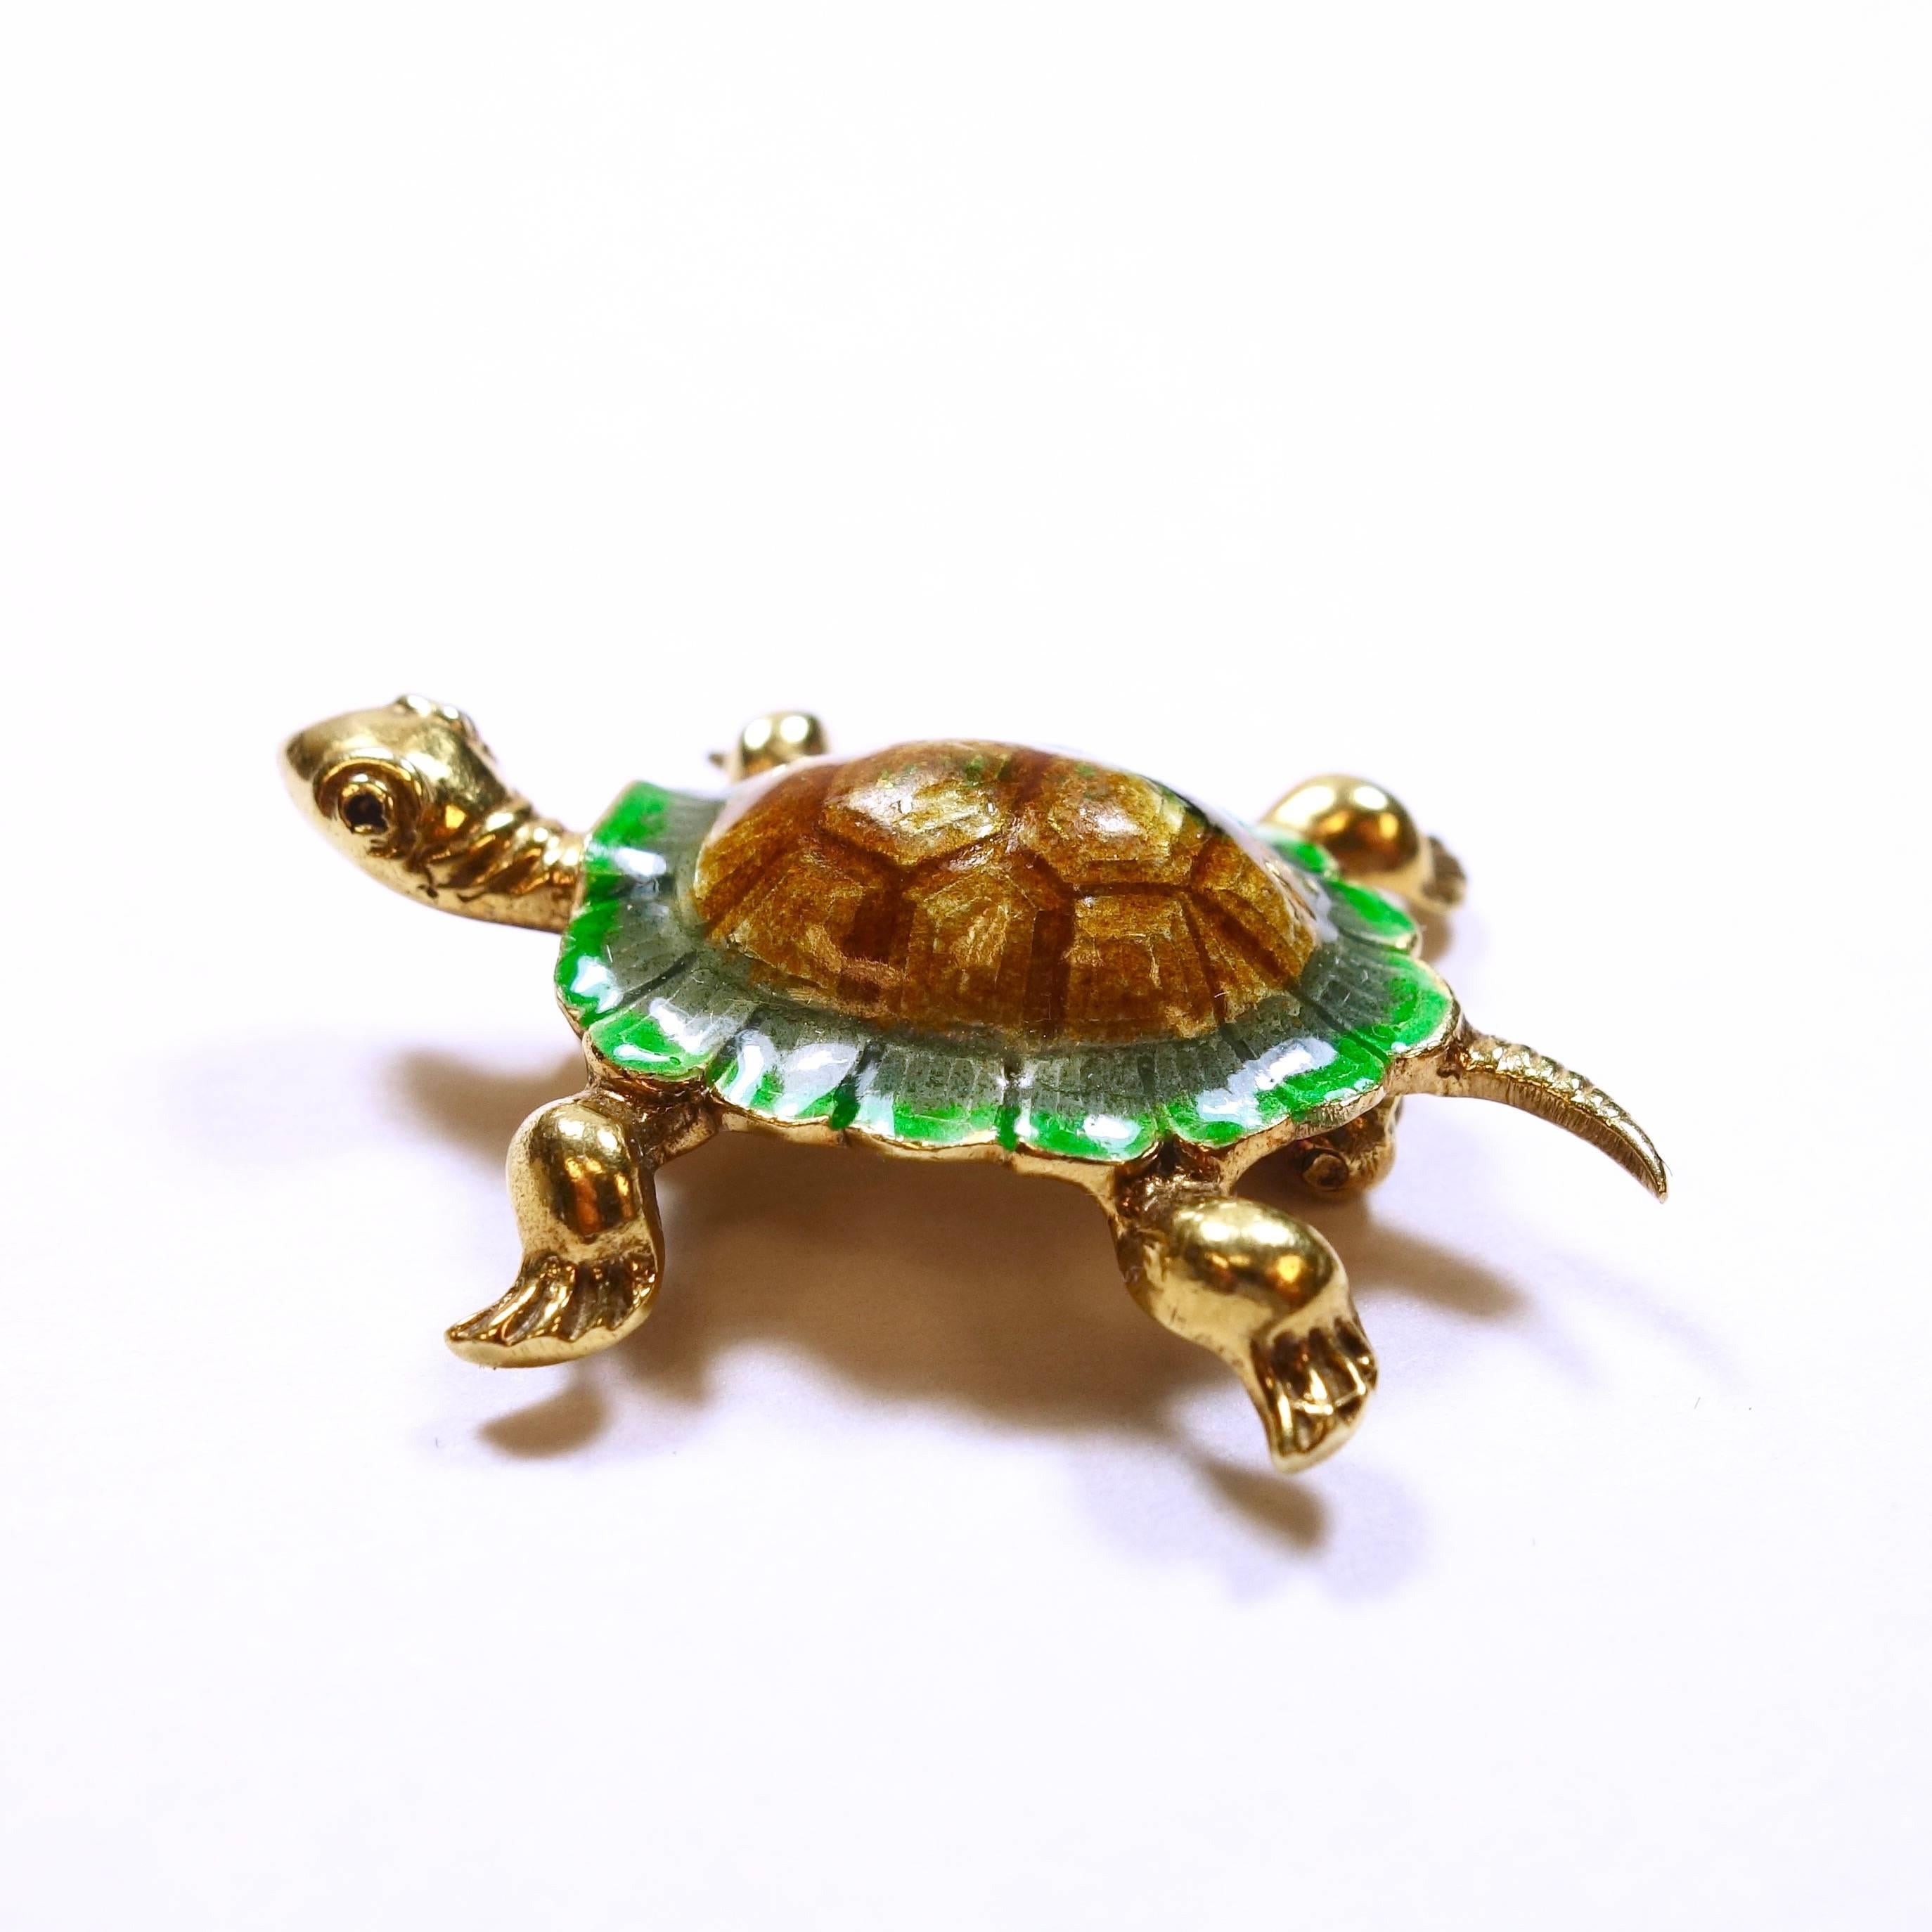 Precious 14K yellow gold turtle pin with multi color enameling.
Measurements: W 24.3 mm x H 35 mm
Weight: 6.2 grams
Condition: excellent